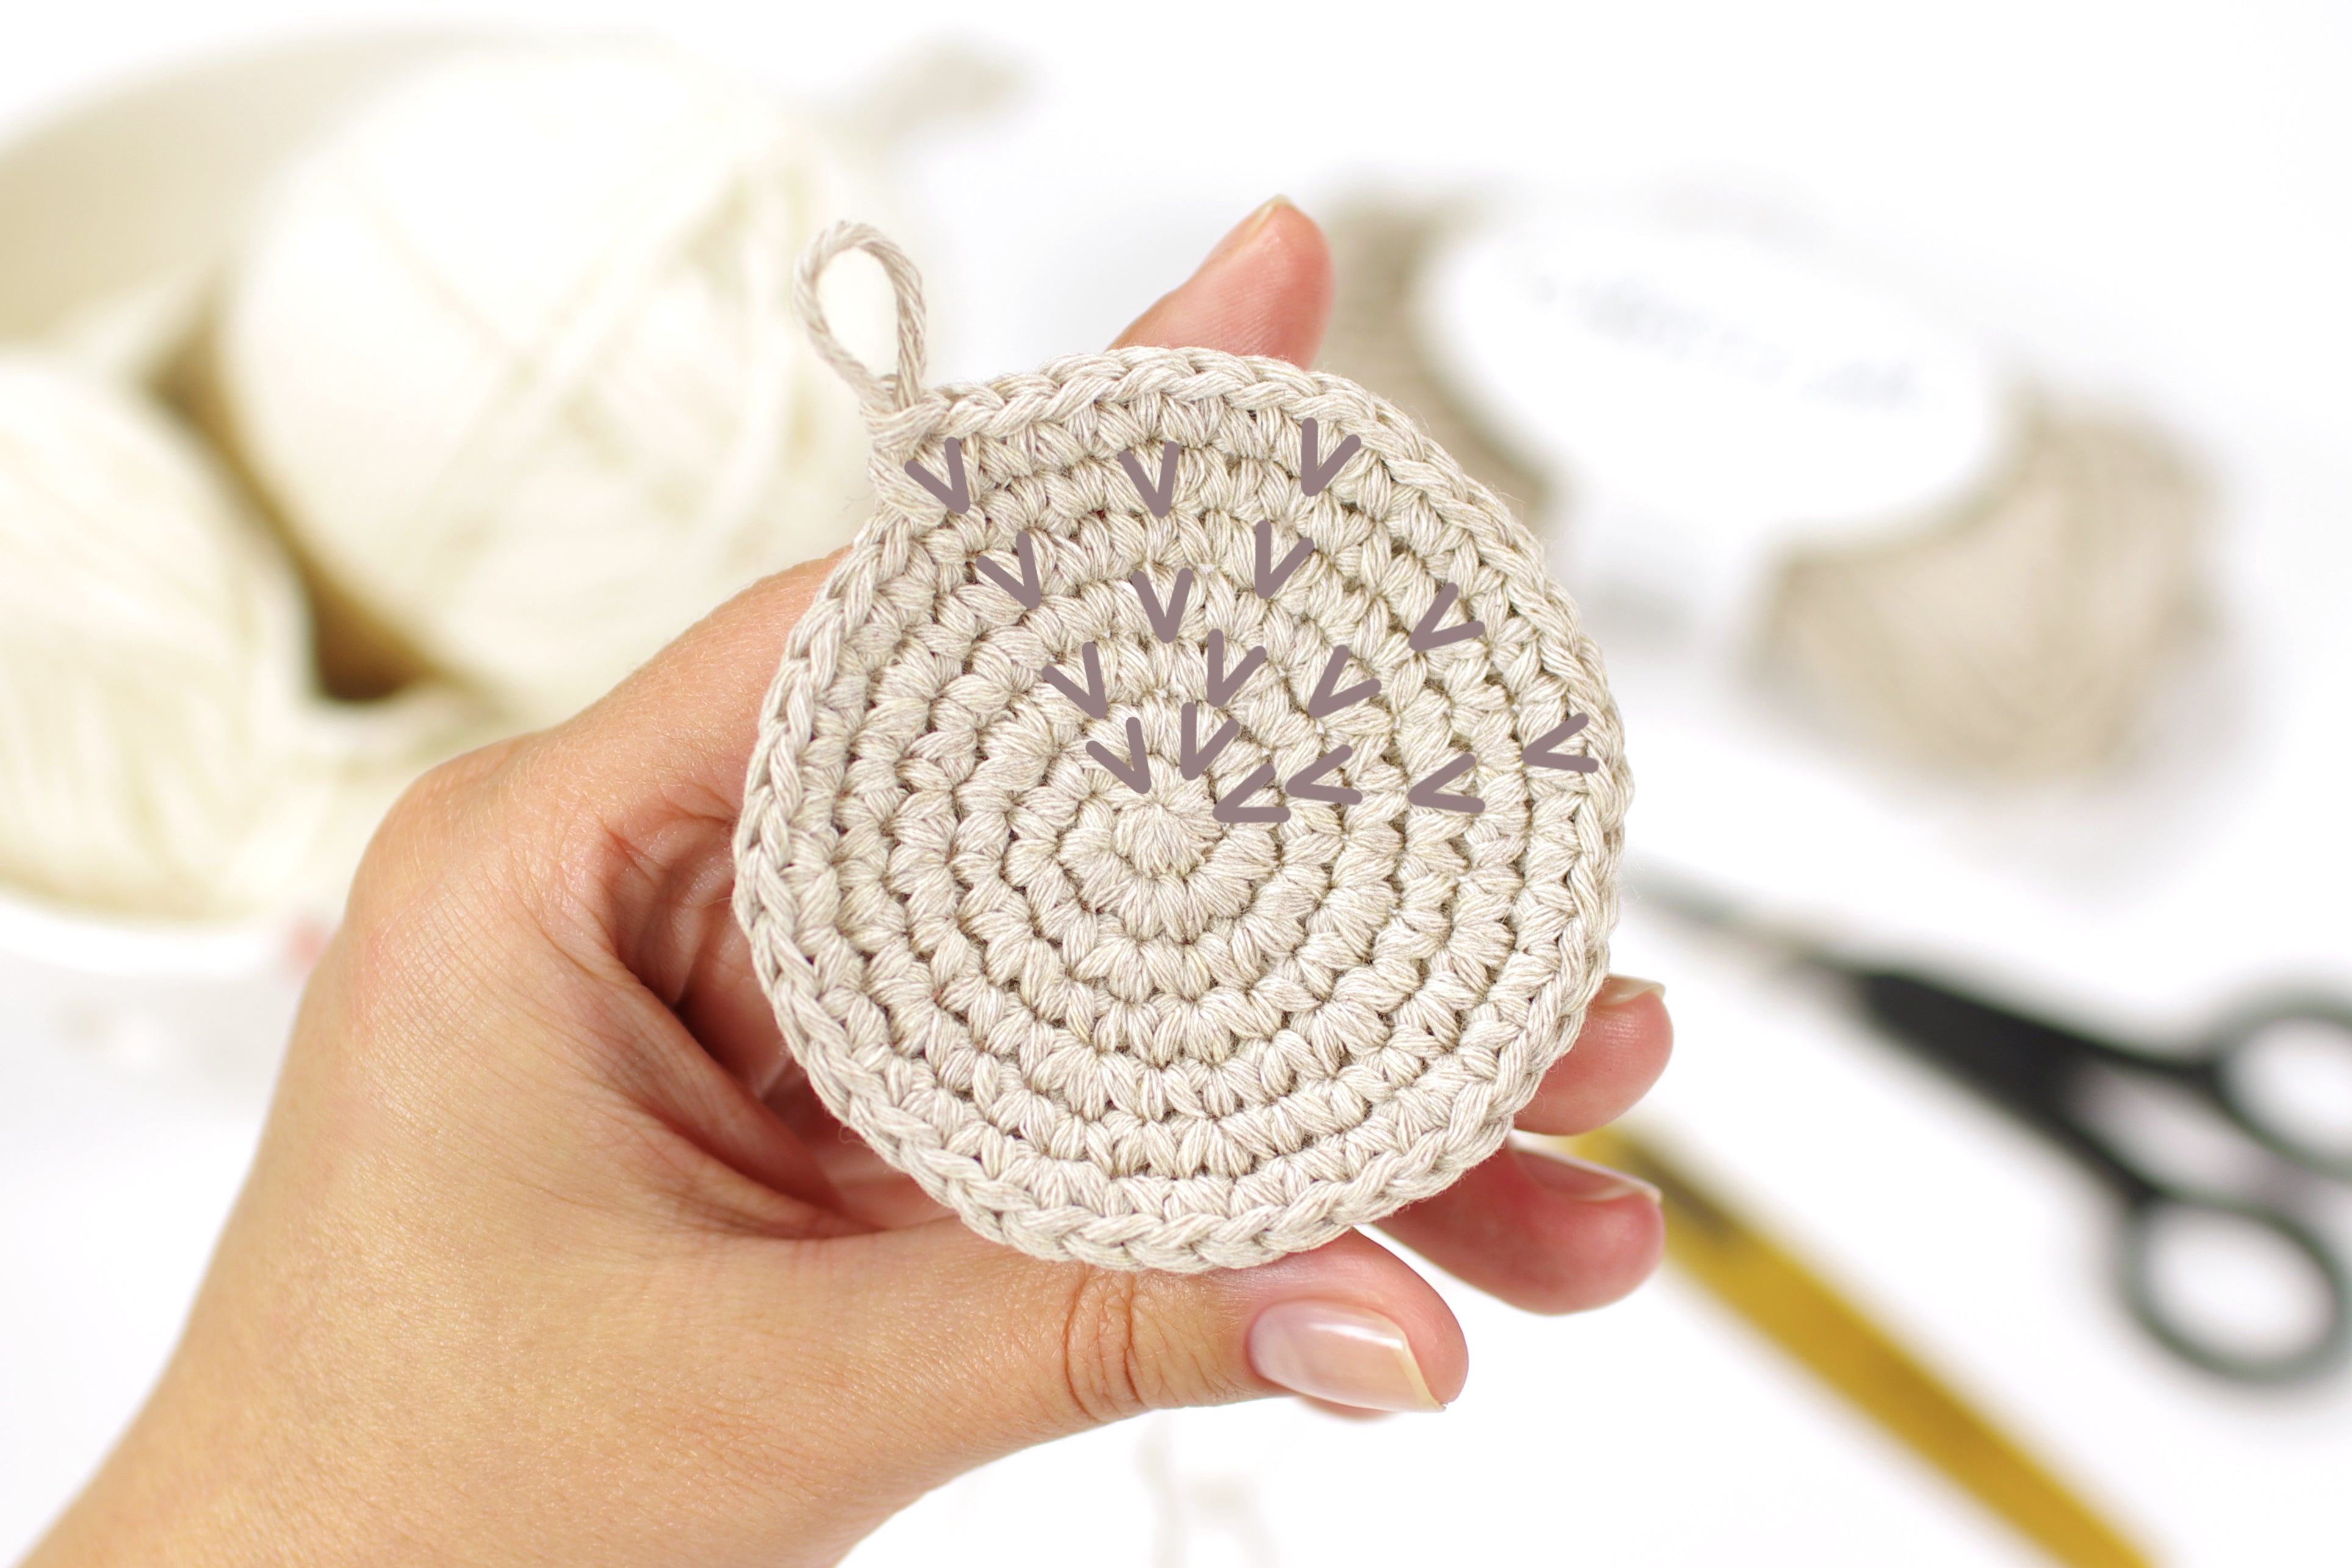 TUTORIAL: Start Crocheting in Round with a Magic Ring – Kristi Tullus